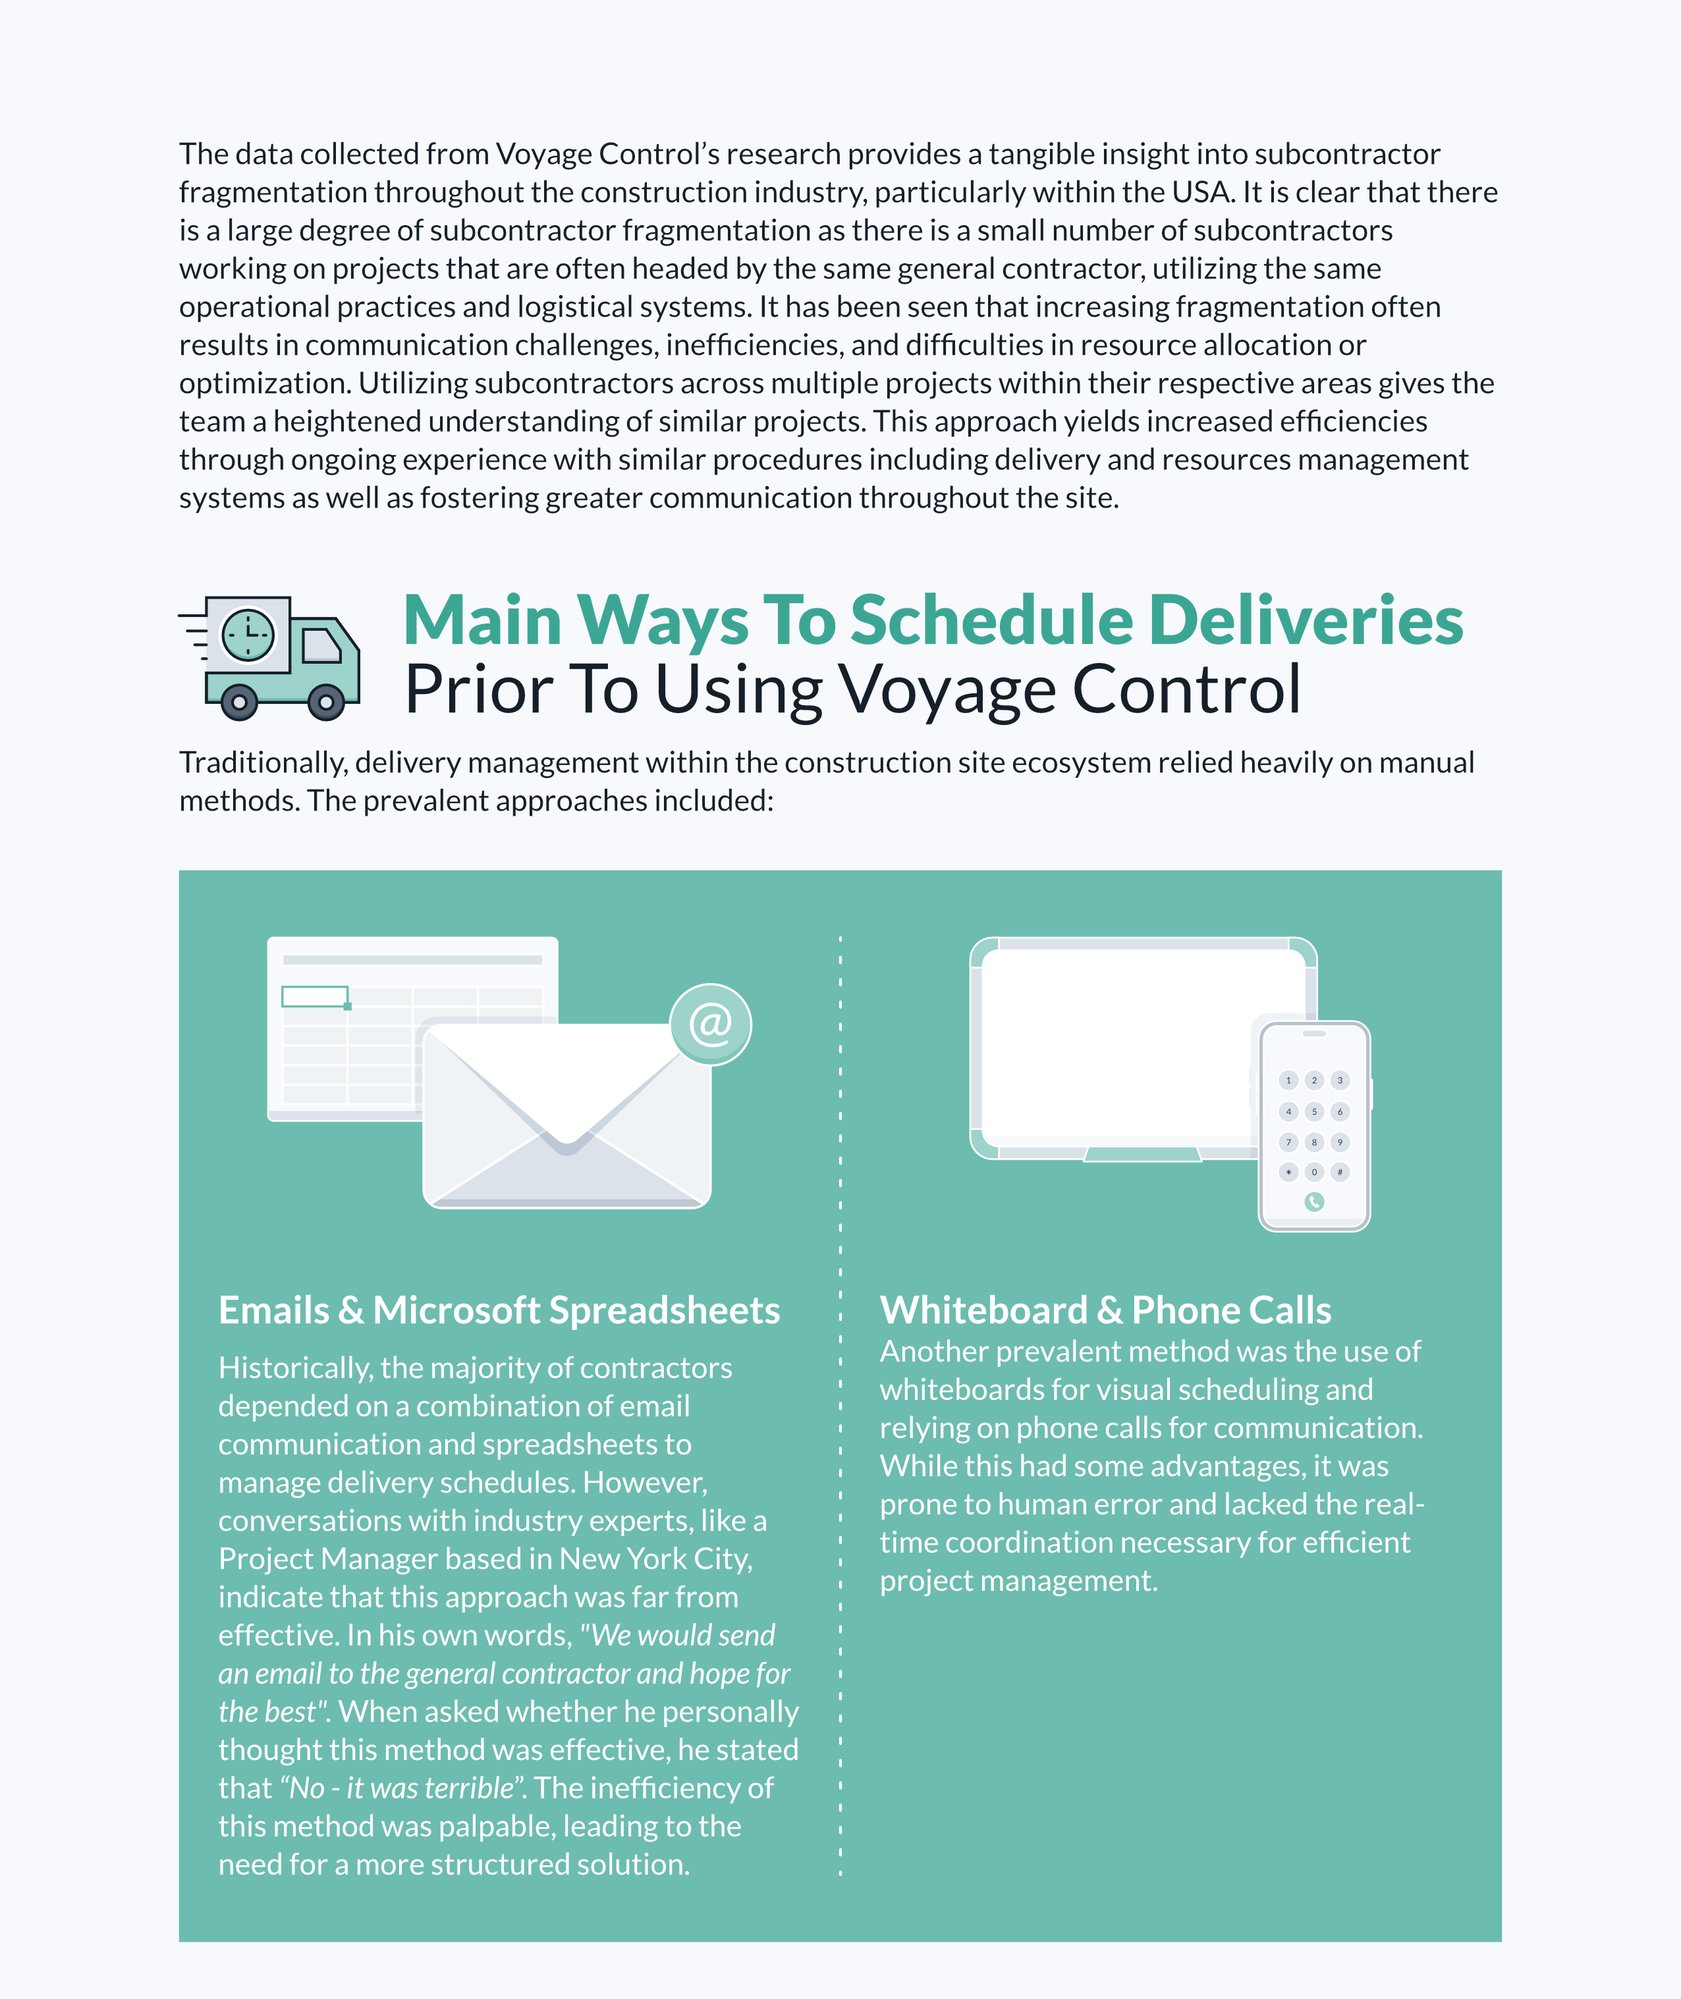 Main ways to schedule deliveries prior to using Voyage Control